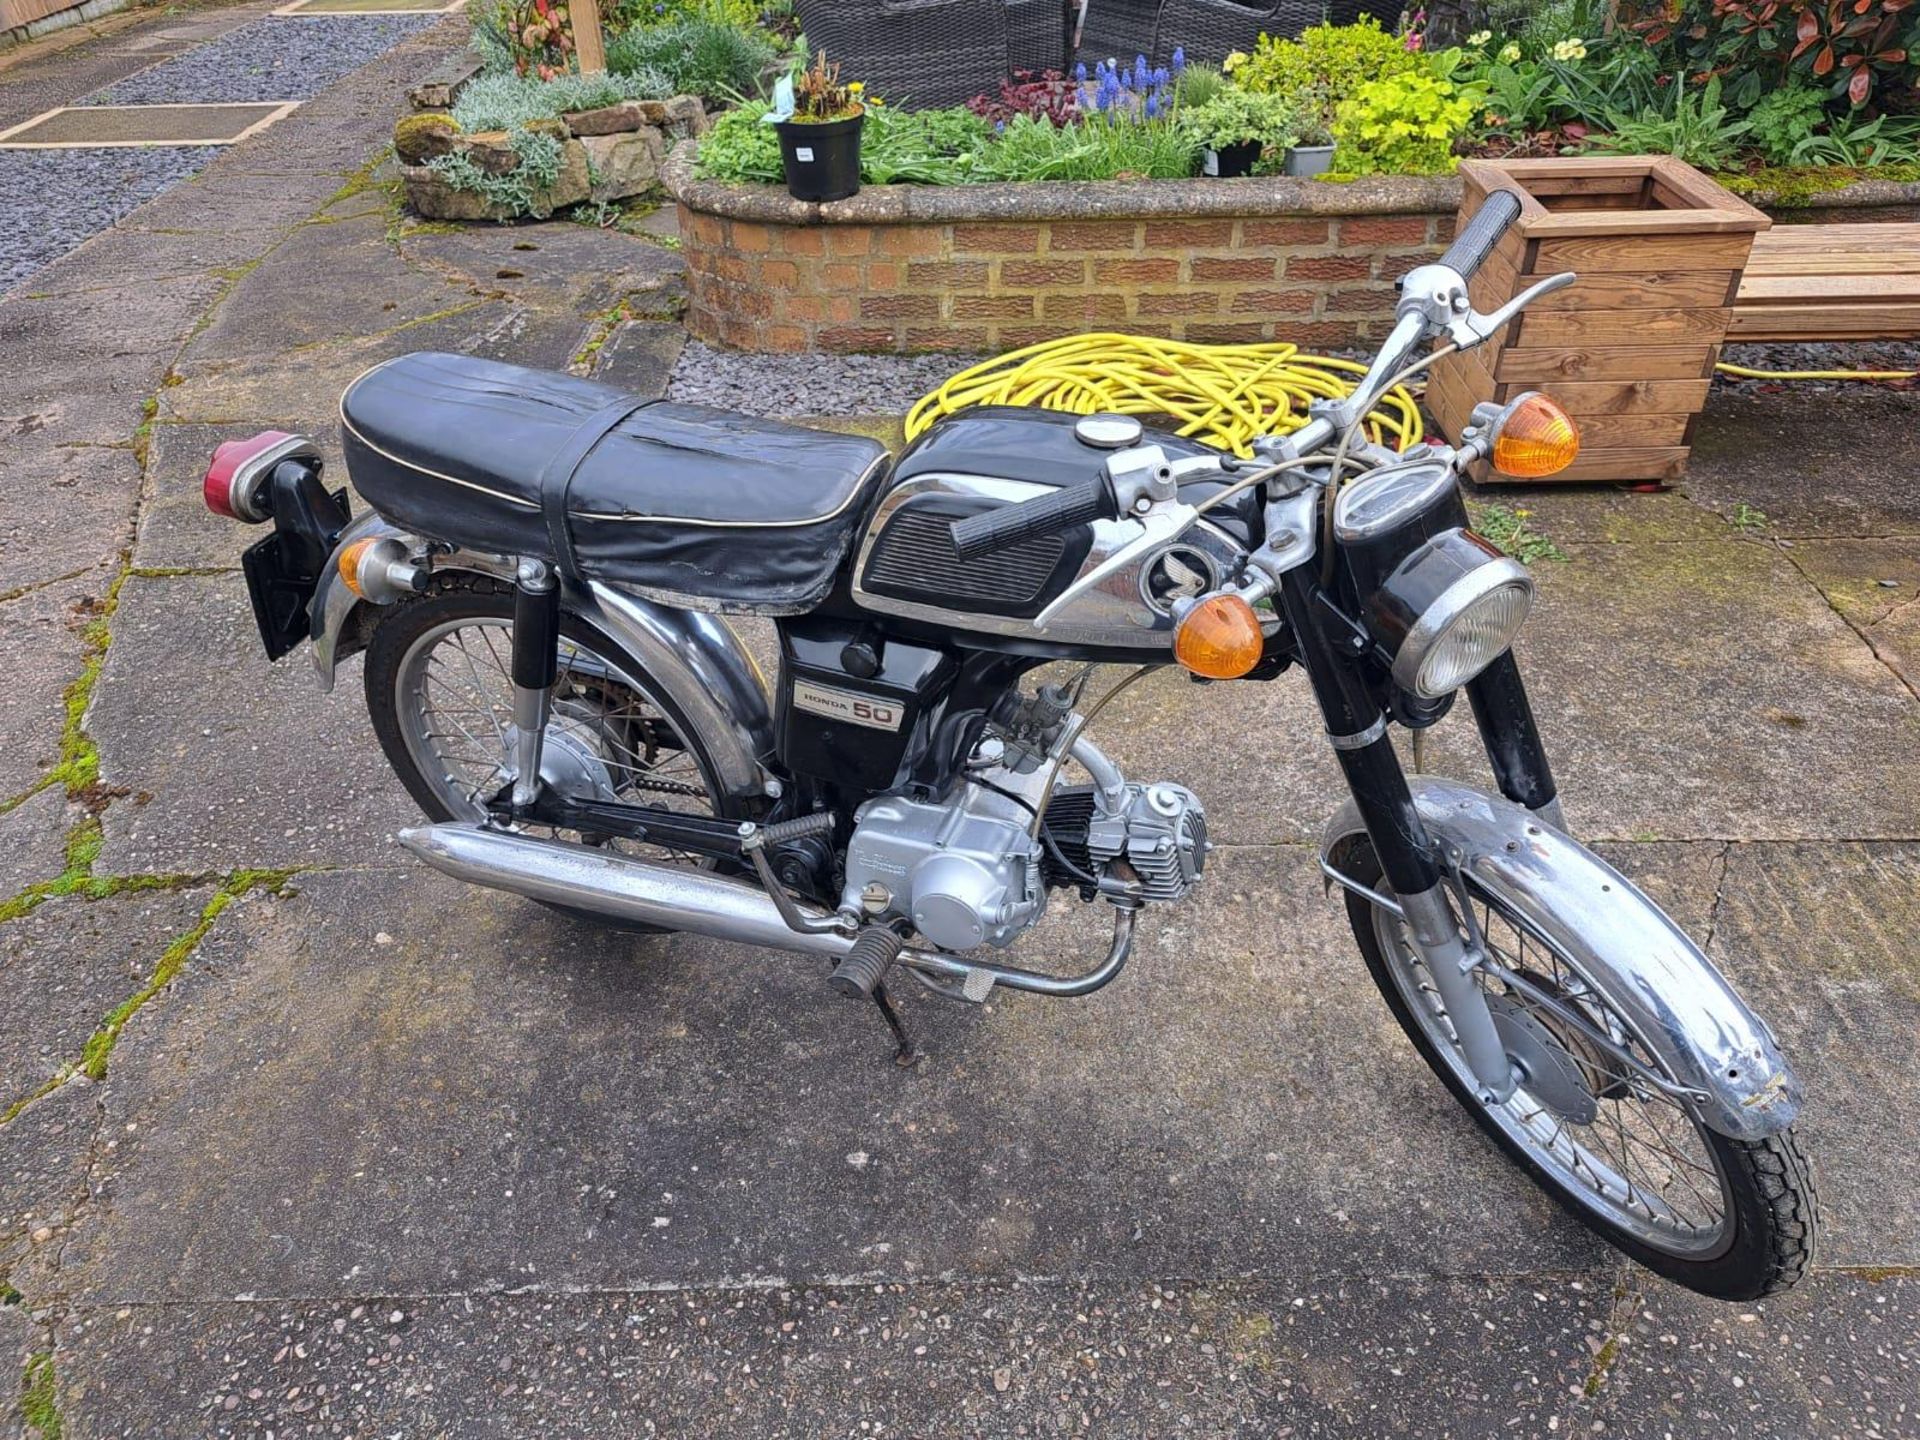 A 1972 HONDA 50 MOTORCYCLE - COMES WITH A DATING CERTIFICATE TO ENABLE REGISTRATION ON A V5C, VENDOR